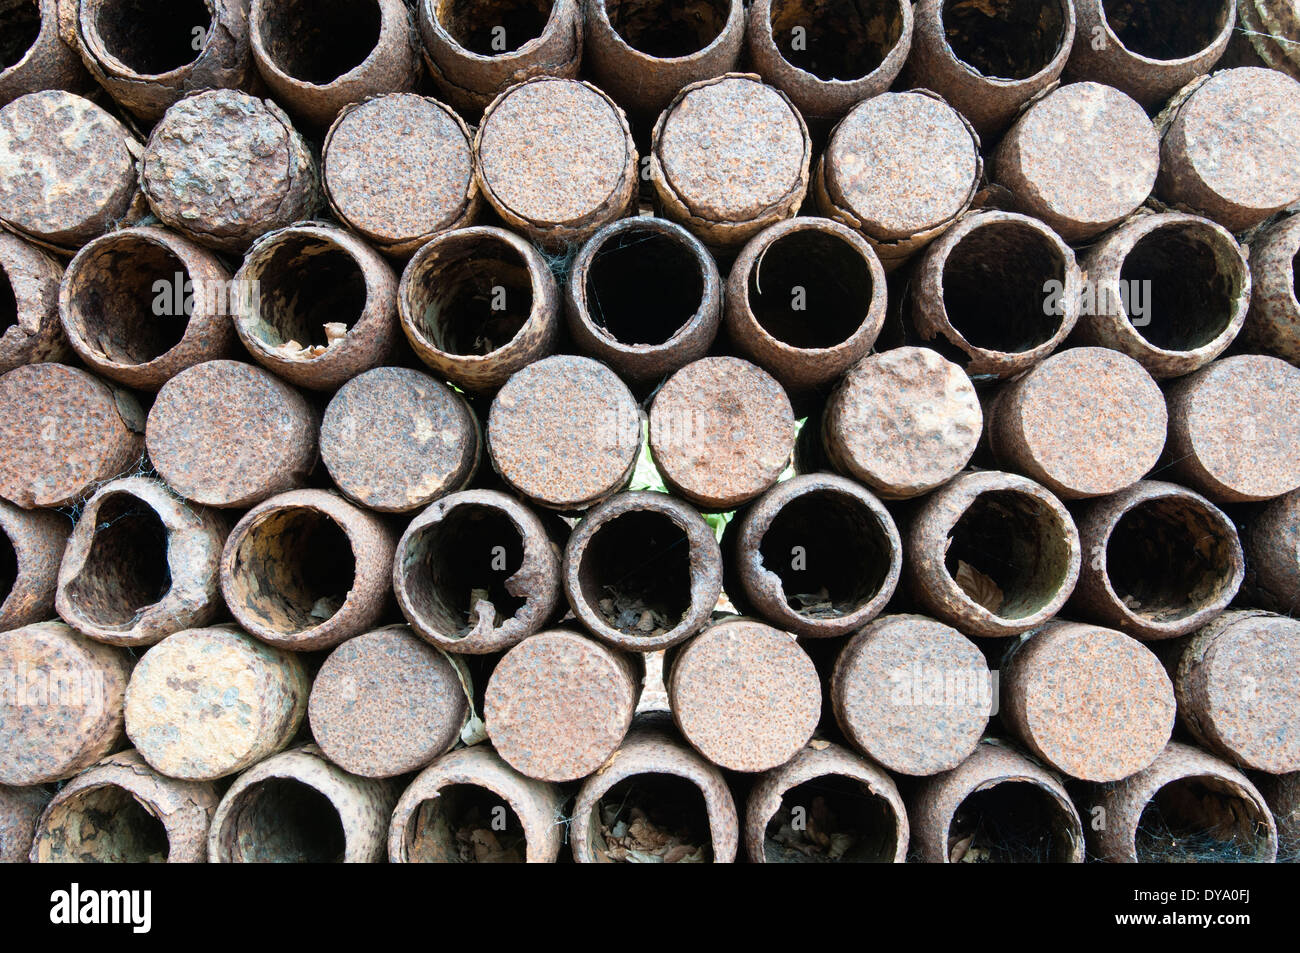 France, Somme. A stack of artillery shell casings from the battle of the Somme, World War 1. Stock Photo